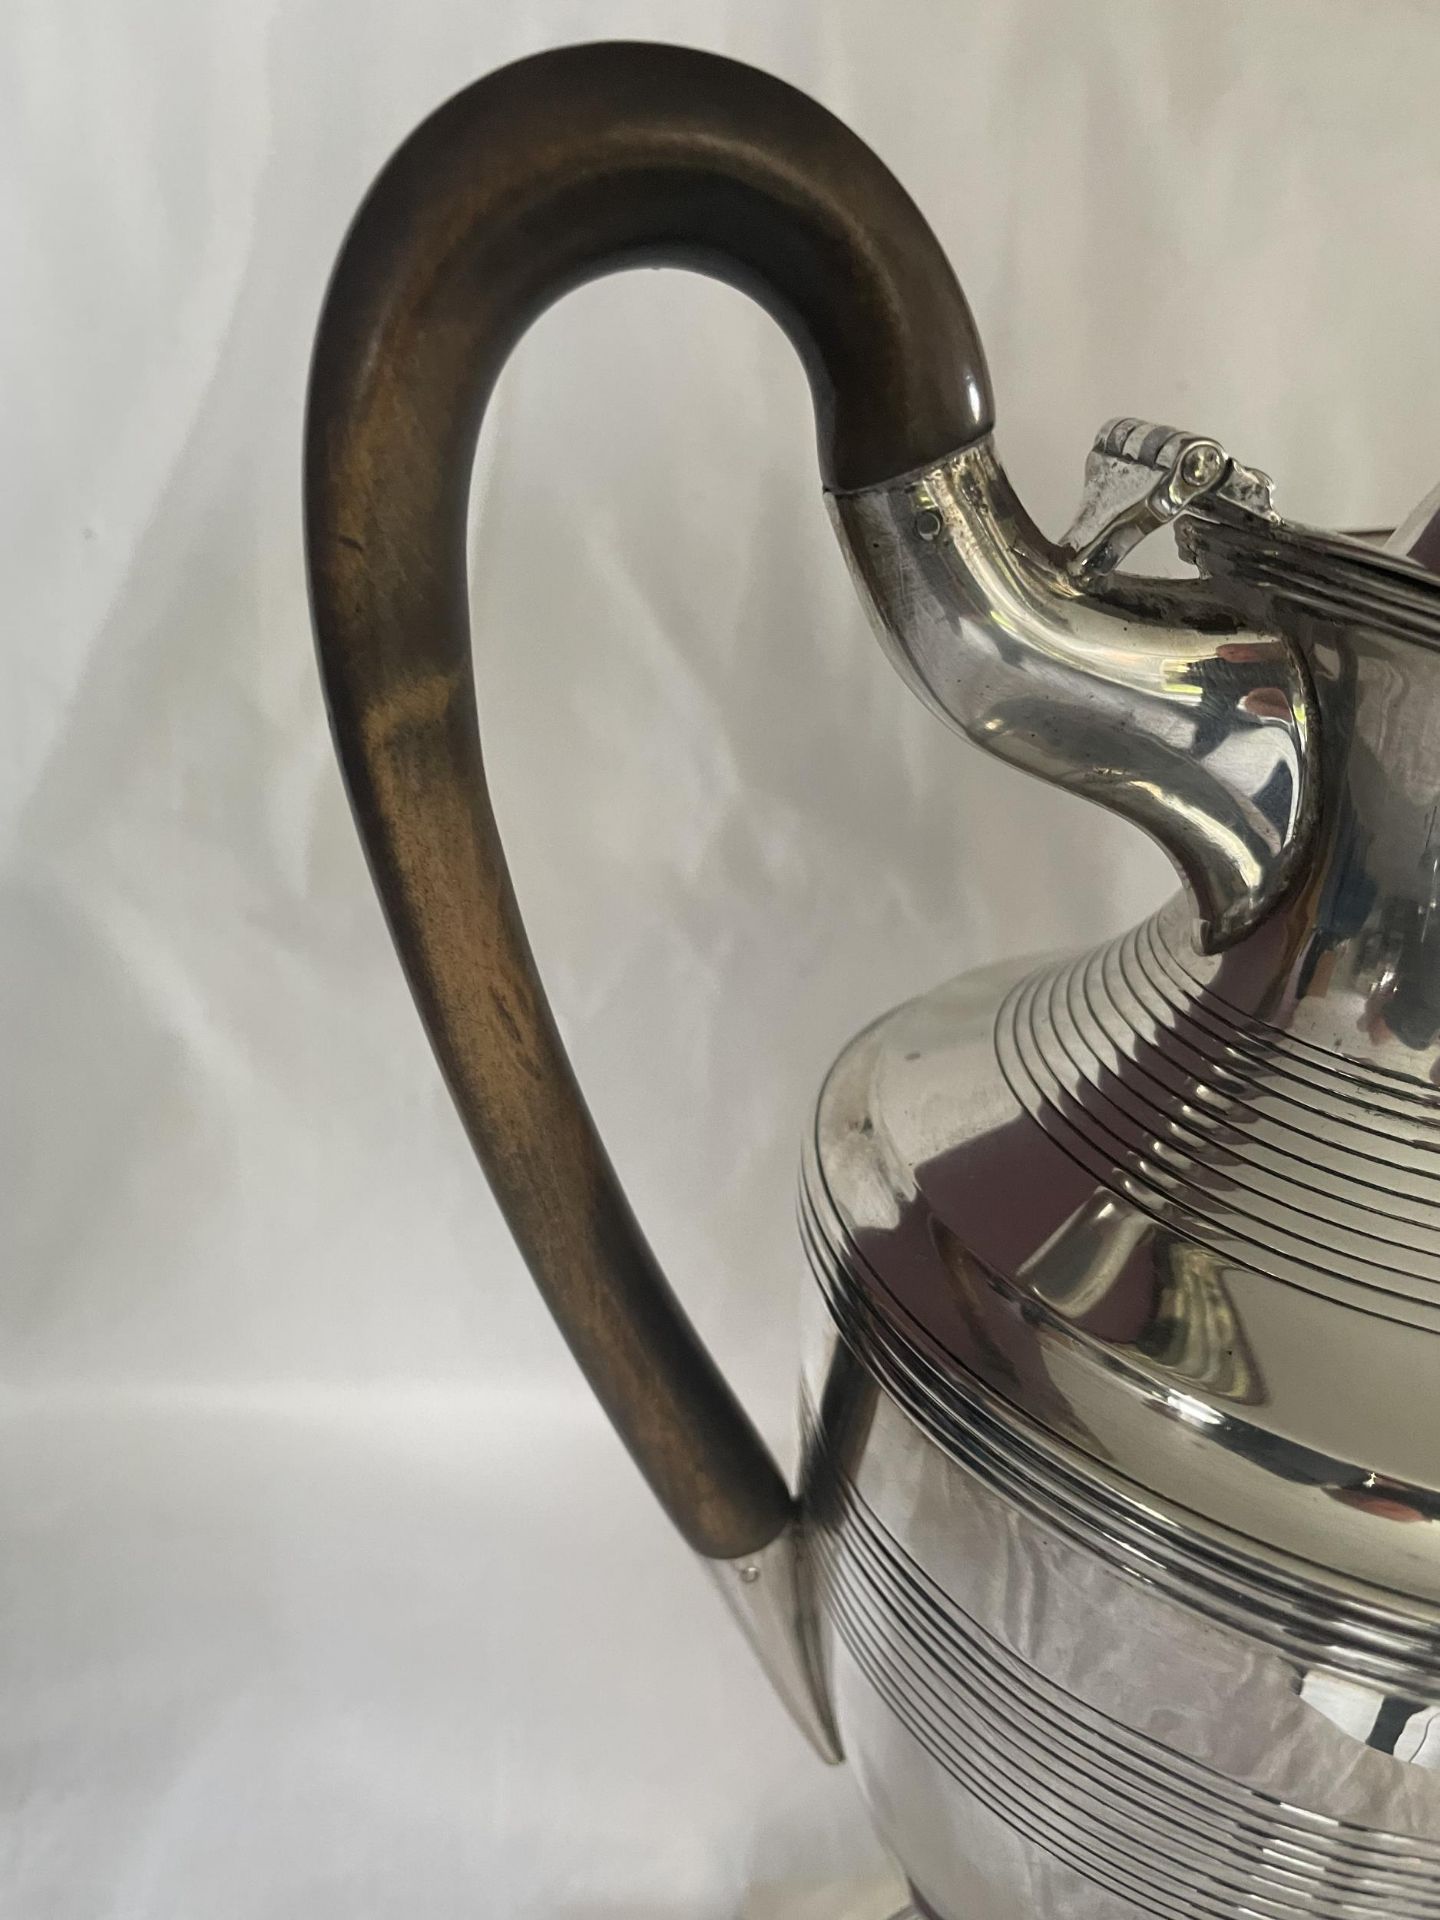 A HALLMARKED 1819 LONDON SILVER CLARET JUG WITH FRUIT WOOD HANDLE, MAKER C S HARRIS AND SONS LTD - - Image 2 of 7